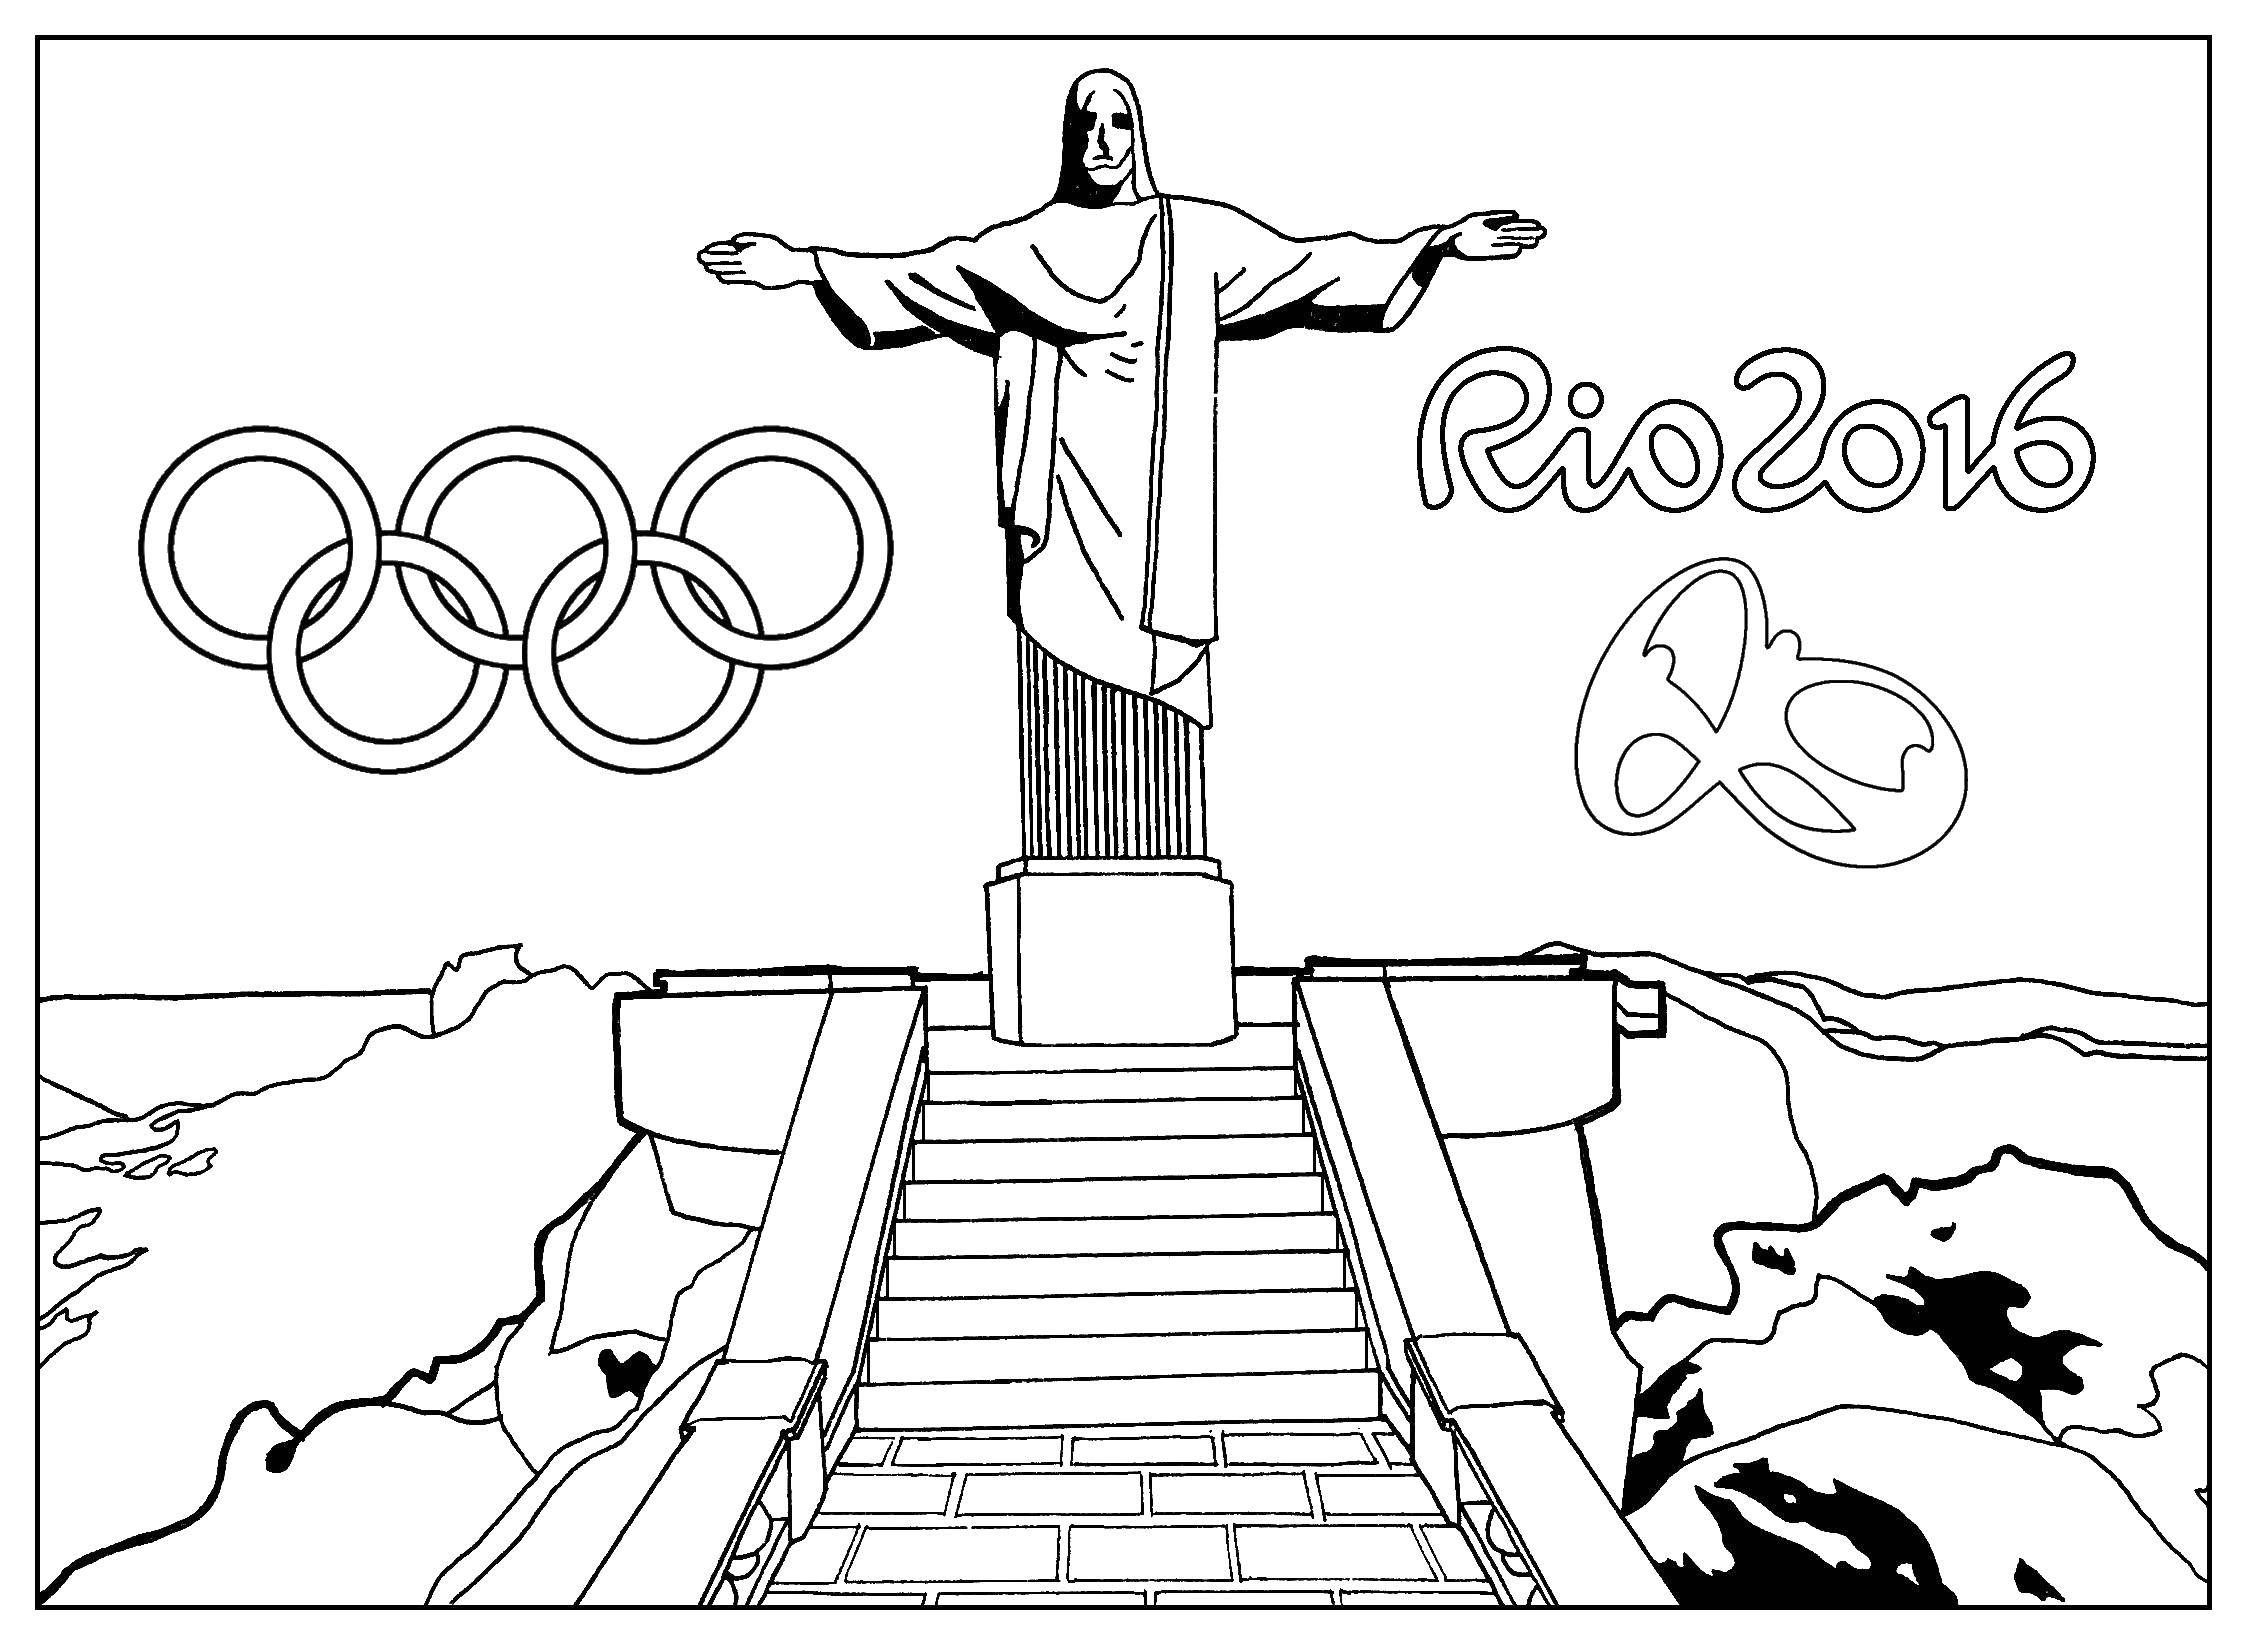 Coloring Games in Rio. Category games. Tags:  Olympics.